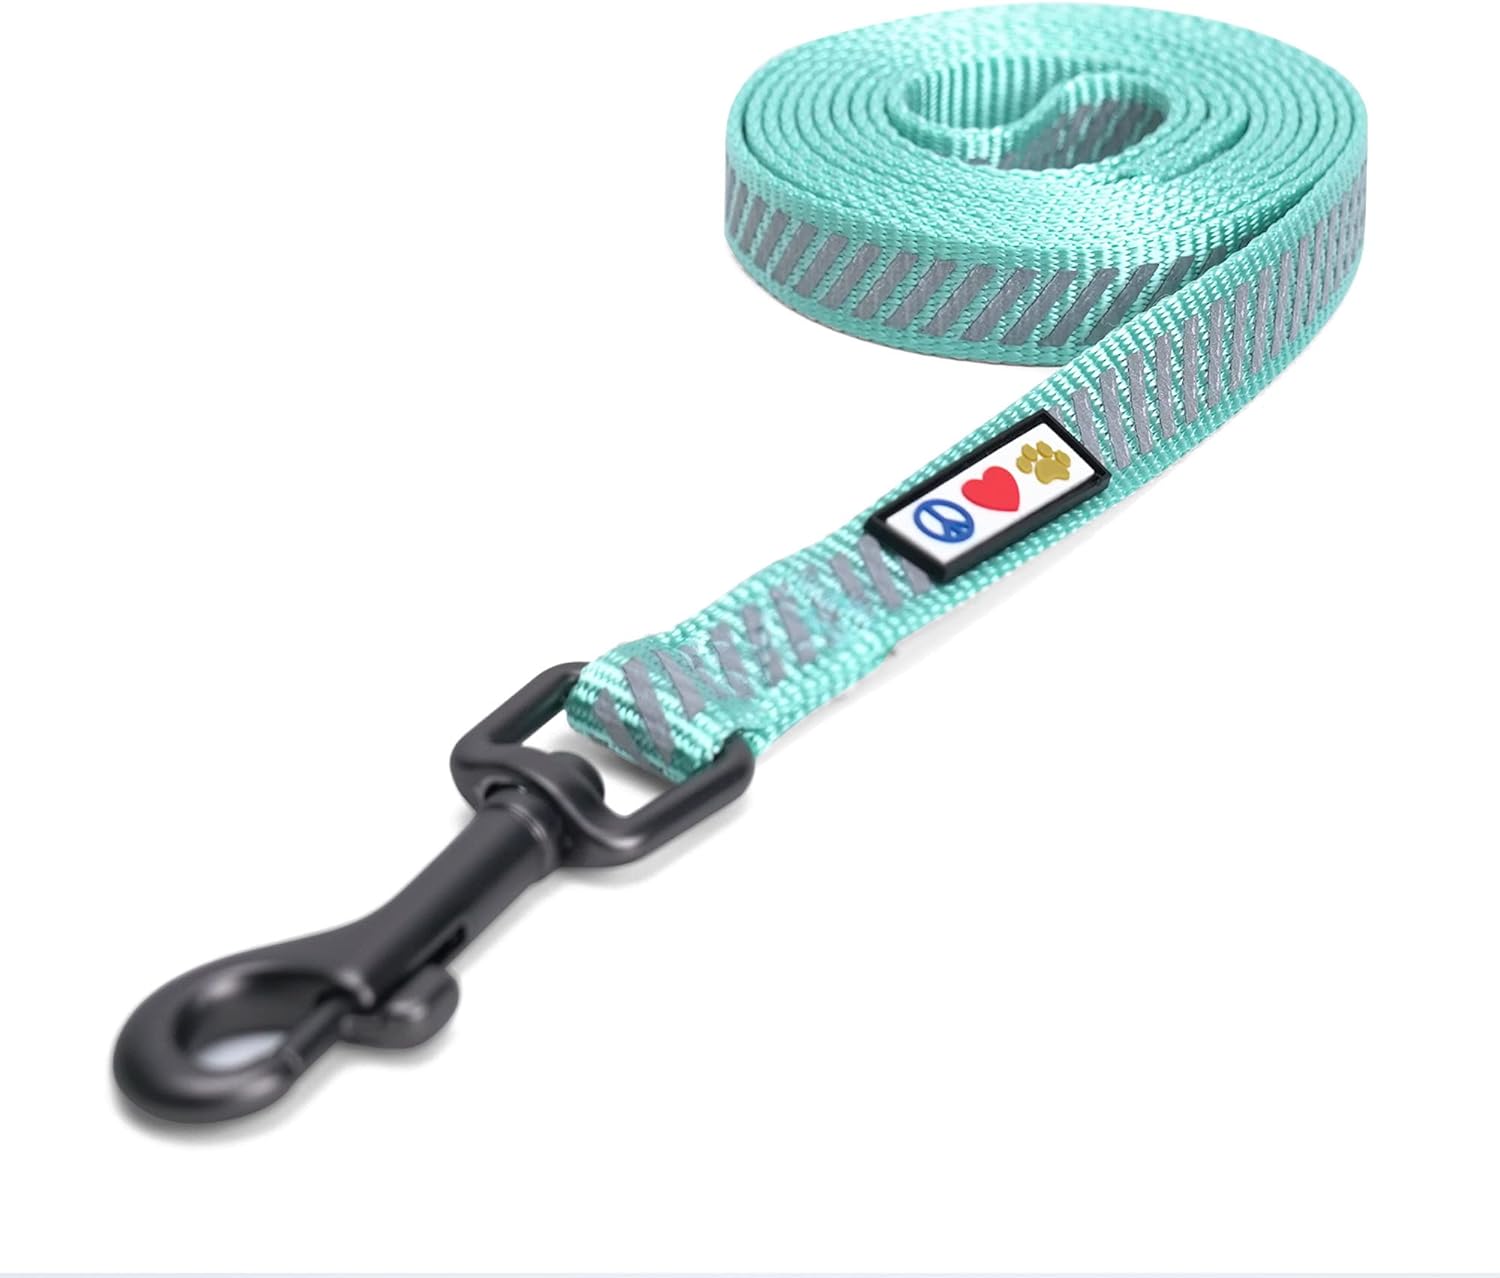 PAWTITAS Traffic Reflective Dog Leash Comfortable Handle for Heavy Duty Dog Training Lead for Small and Medium Dogs 6 ft - 180 cm | Extra Small/Small Teal Lead?43396-183865